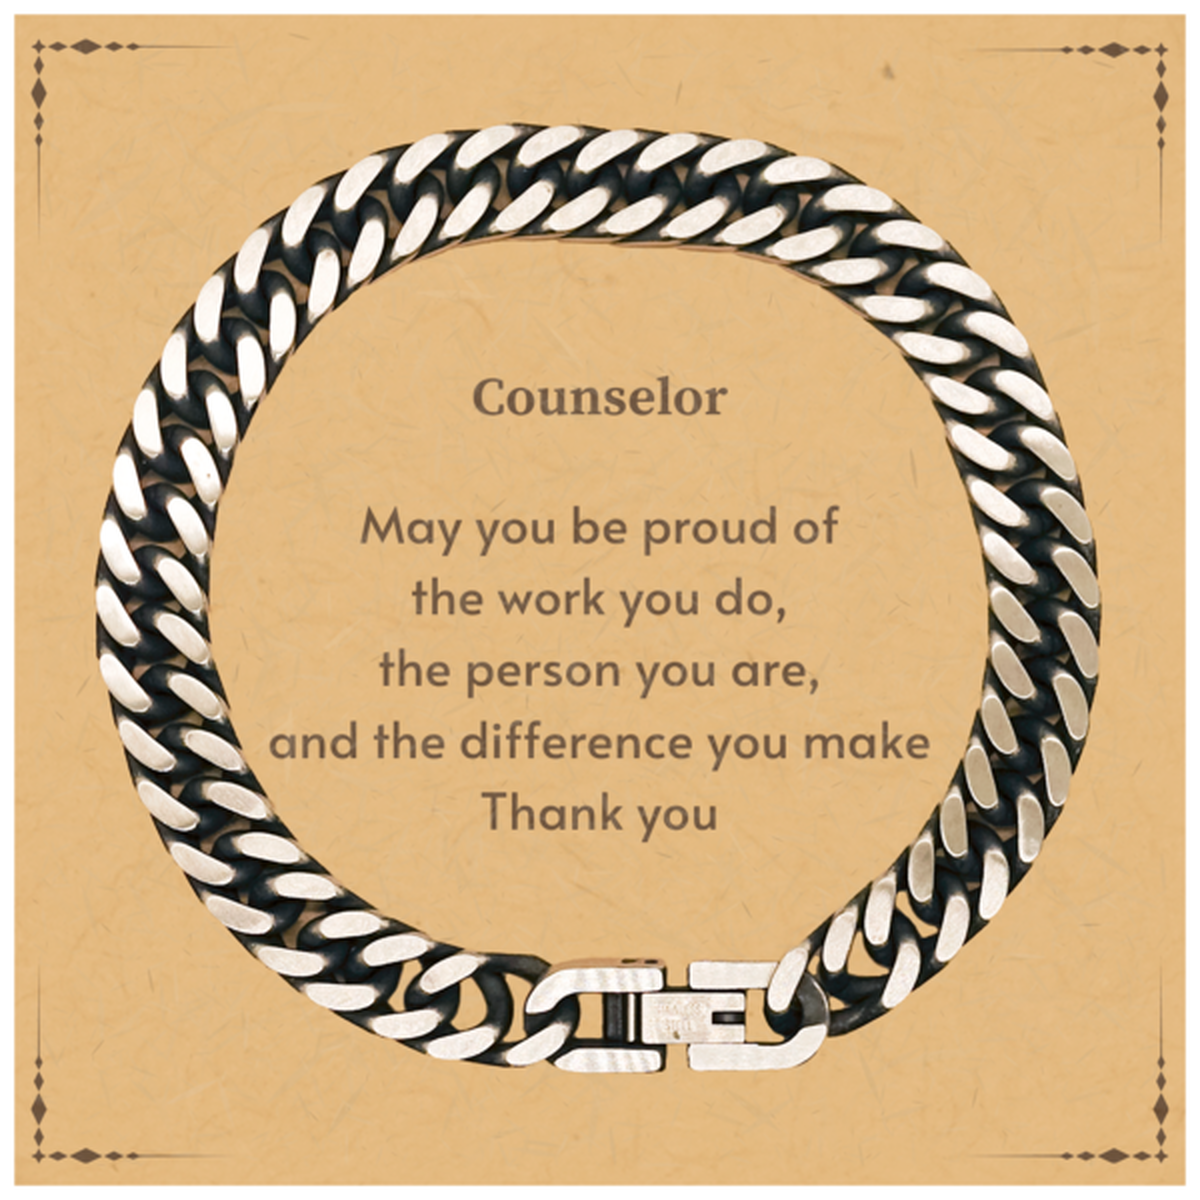 Heartwarming Cuban Link Chain Bracelet Retirement Coworkers Gifts for Counselor, Counselor May You be proud of the work you do, the person you are Gifts for Boss Men Women Friends